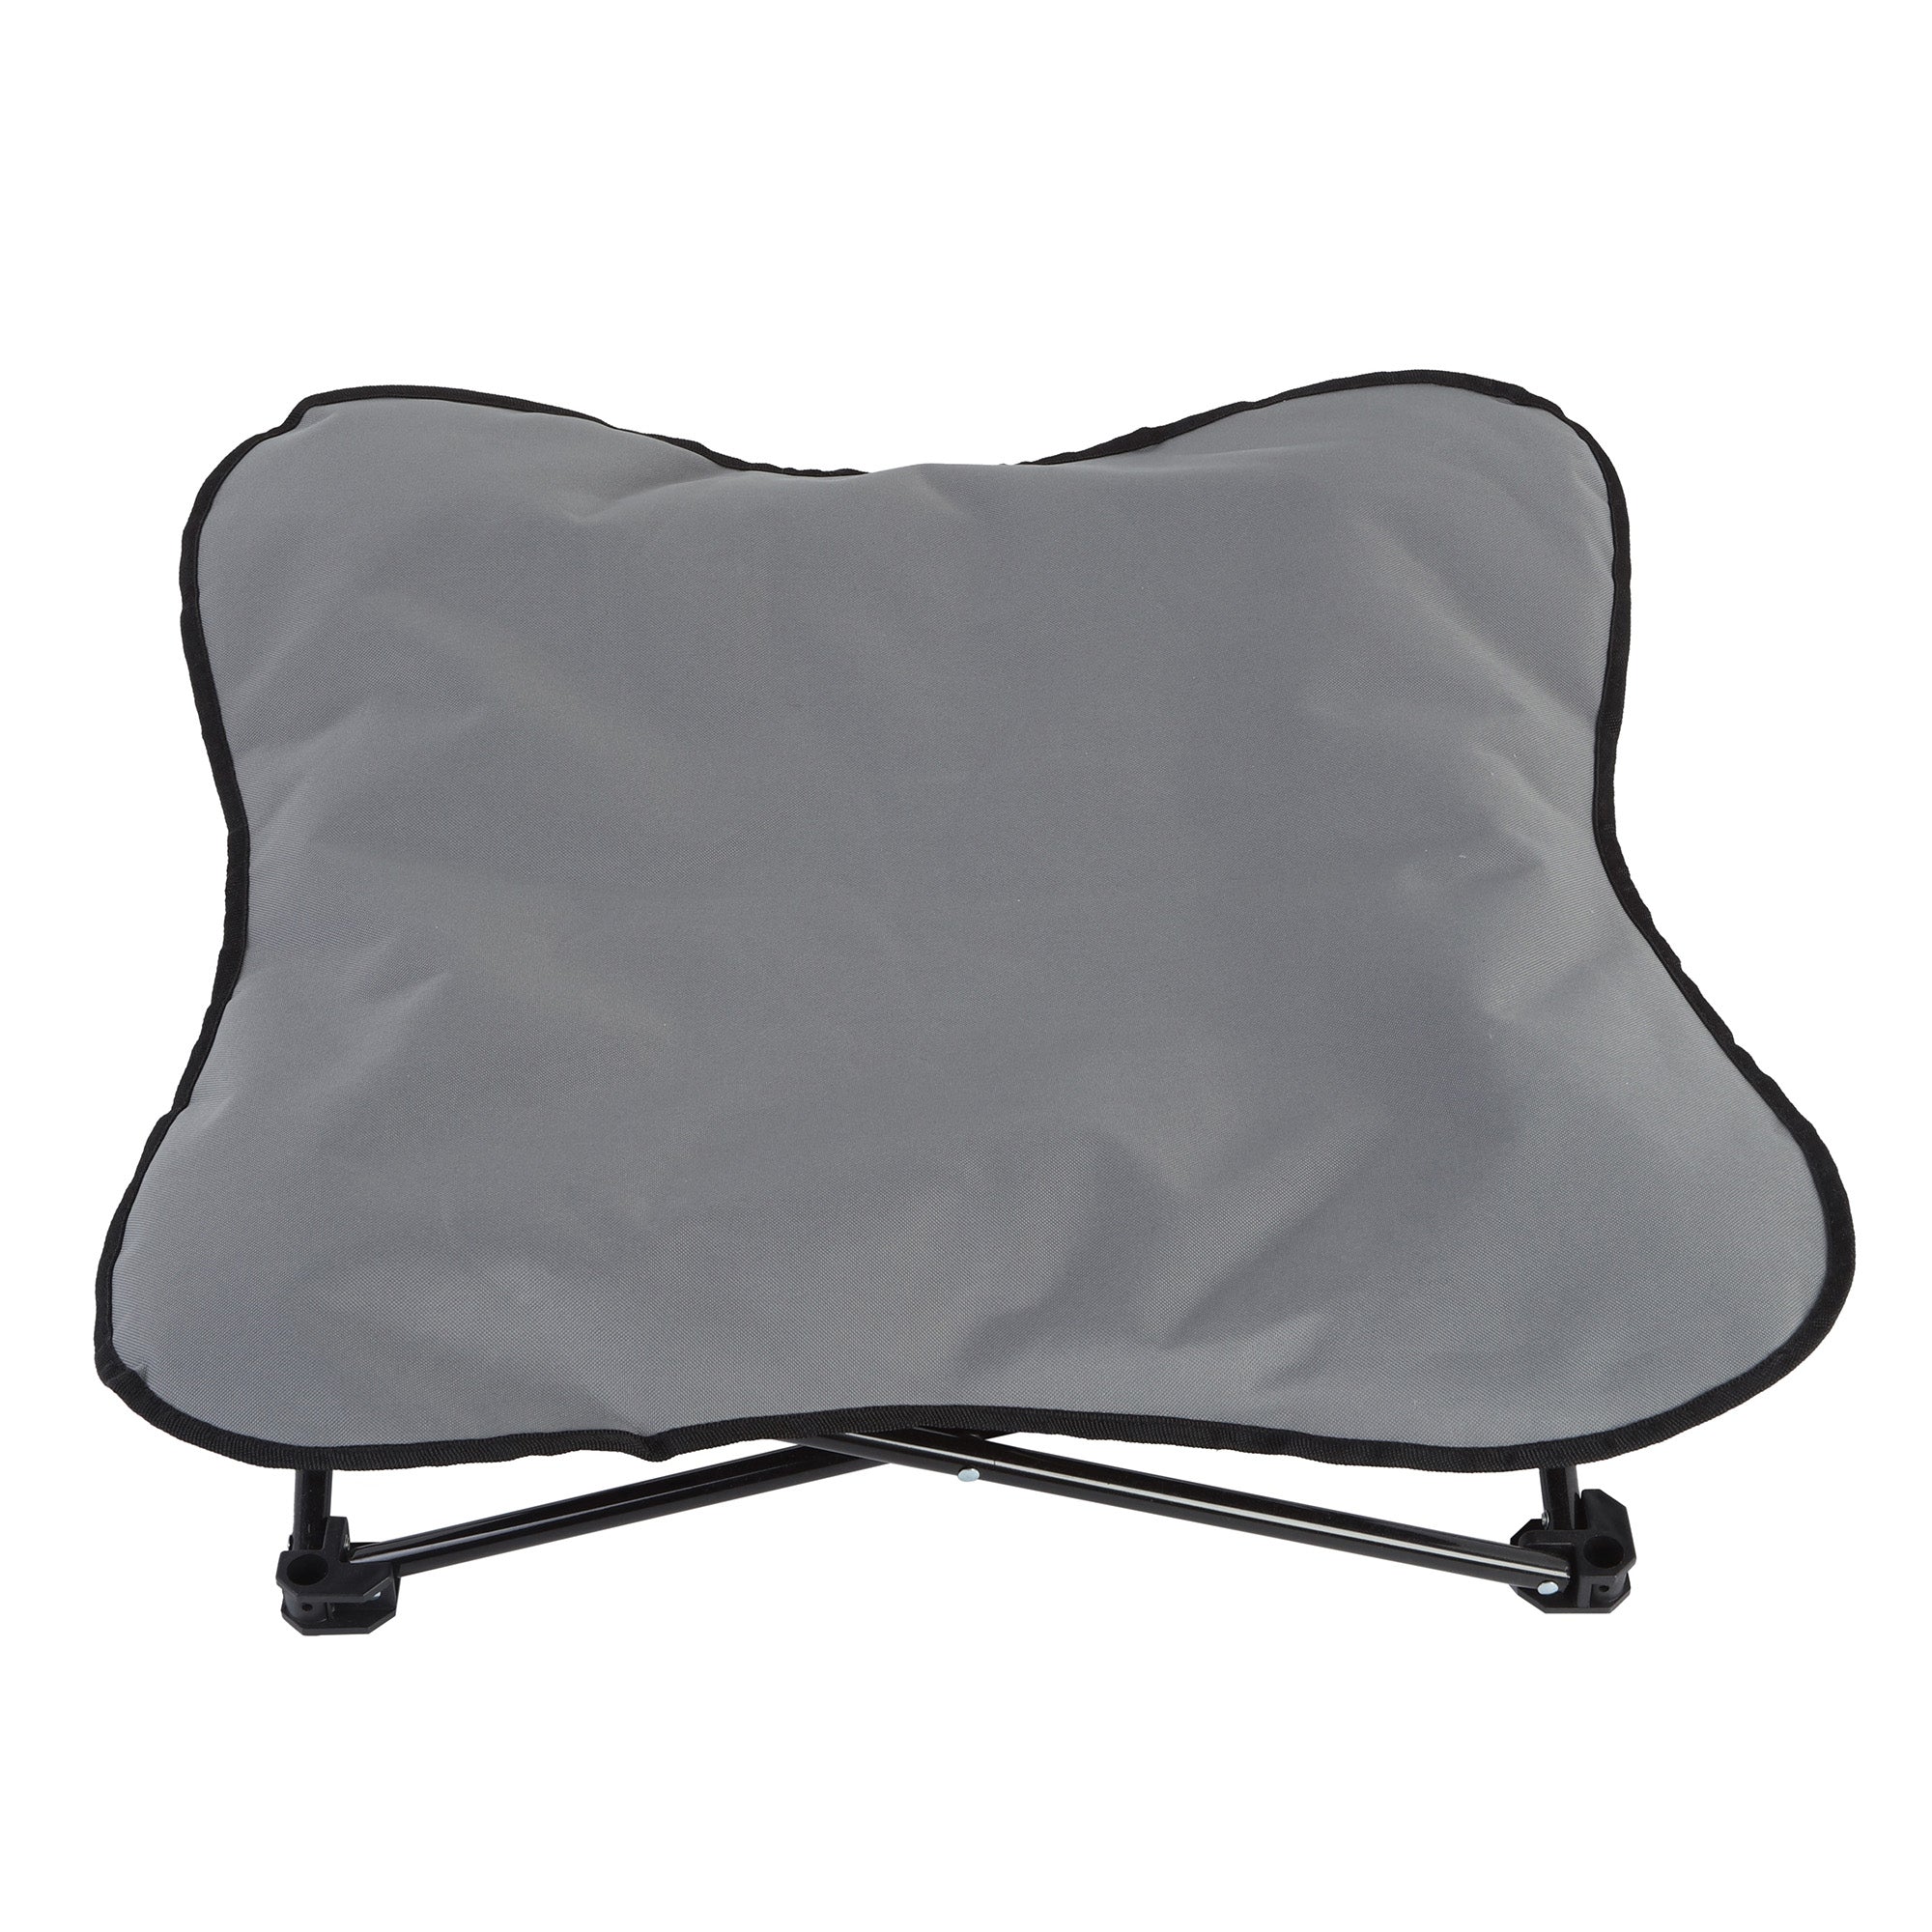 Charlie's Portable and Foldable Outdoor Pet Chair - Grey